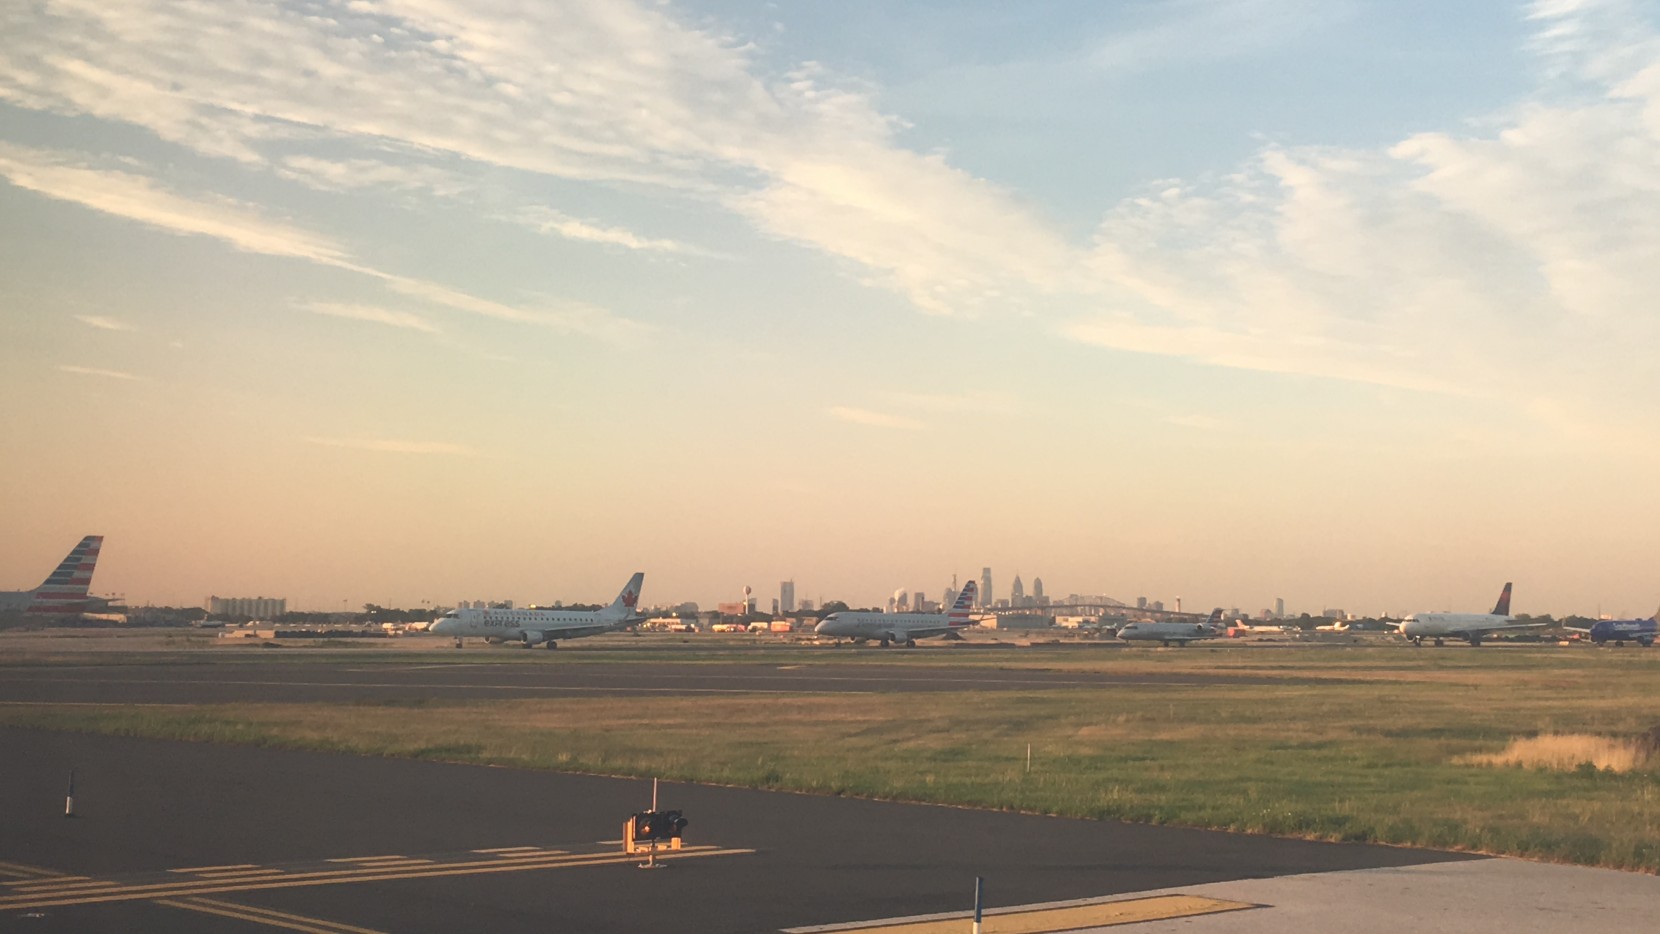 Planes lined up at PHL with the Philadelphia skyline in background.